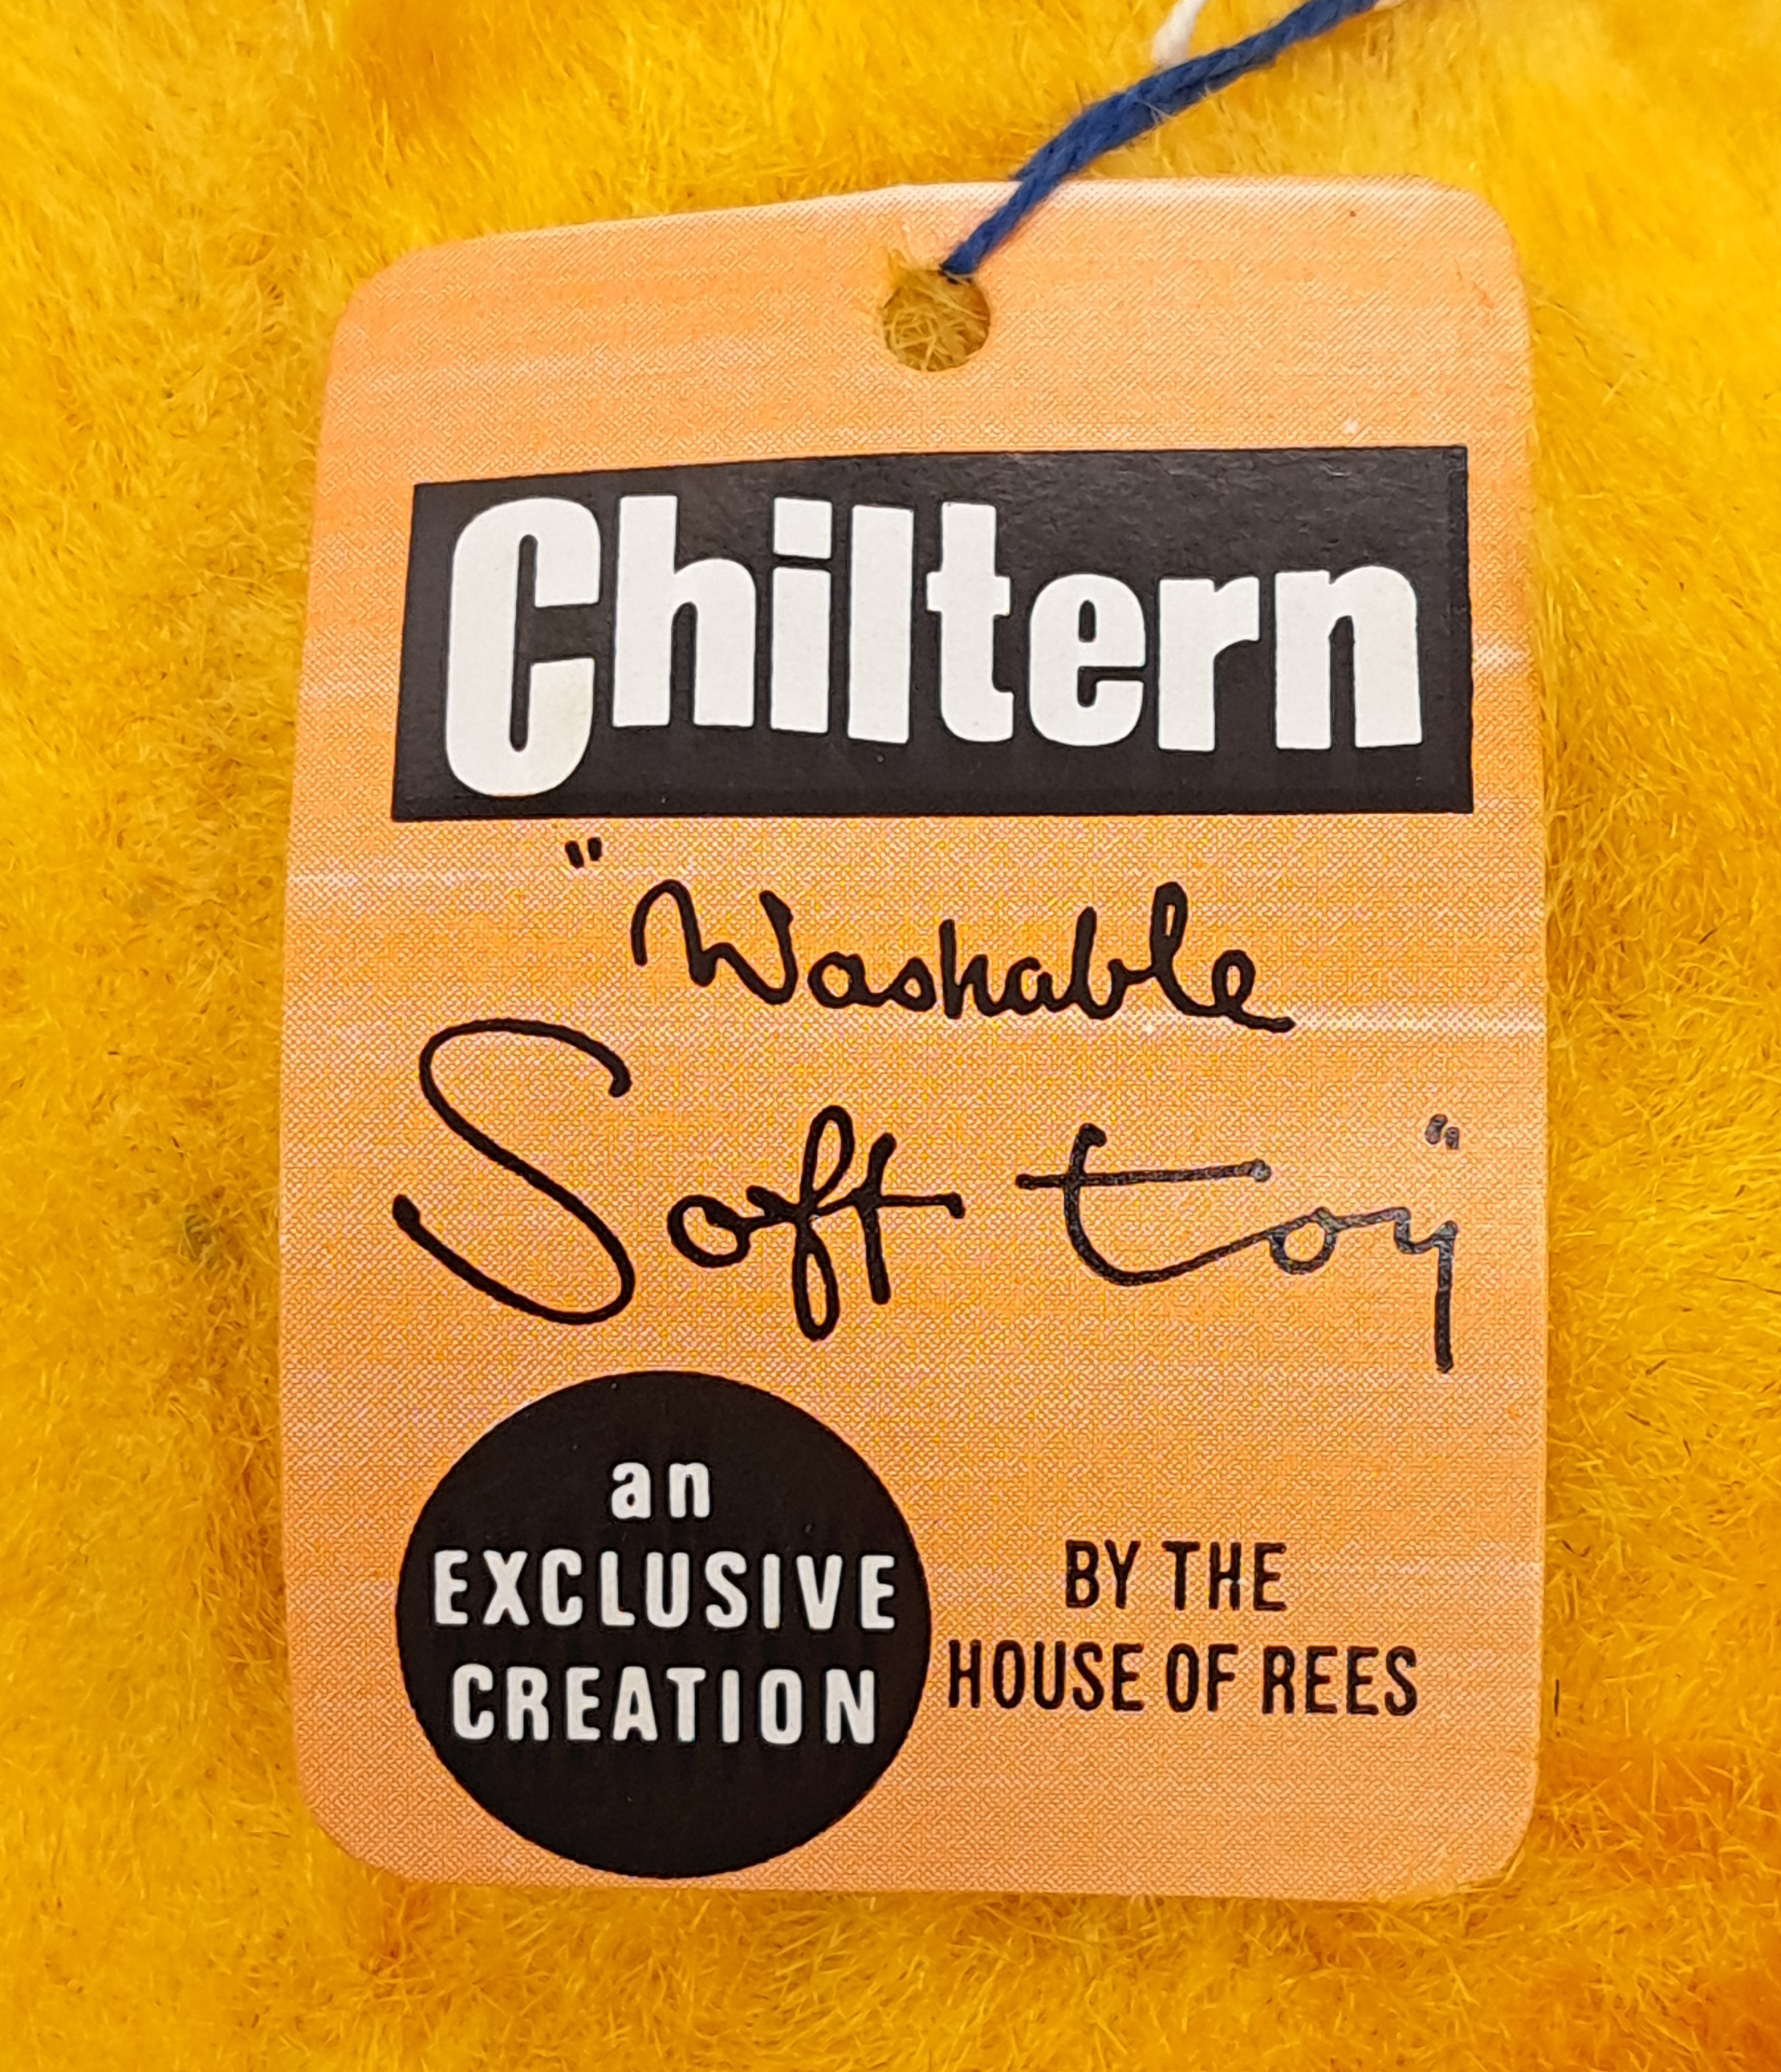 Chiltern assortment of washable/fairy foam toys - Image 6 of 7